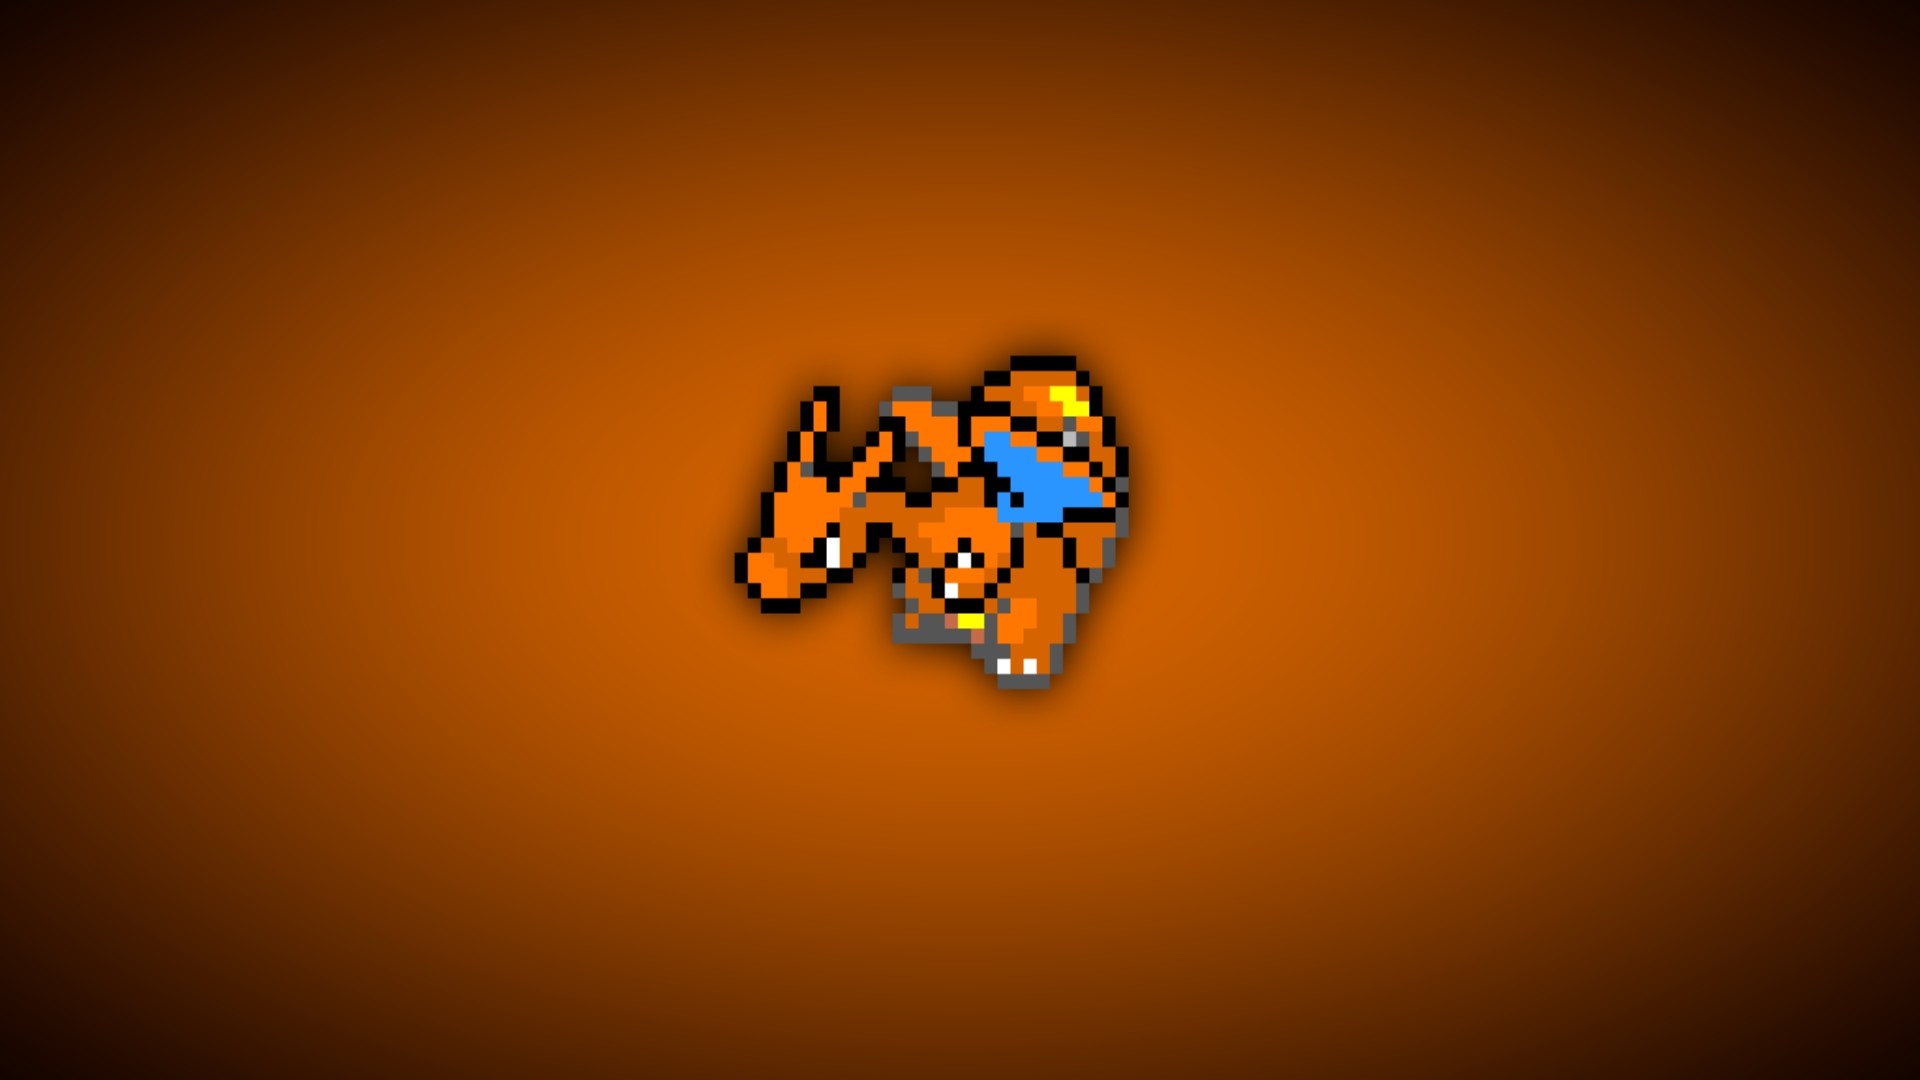 Charizard Backgrounds – Wallpaper Cave | Images Wallpapers | Pinterest |  Digimon, Wallpaper and Hd wallpaper